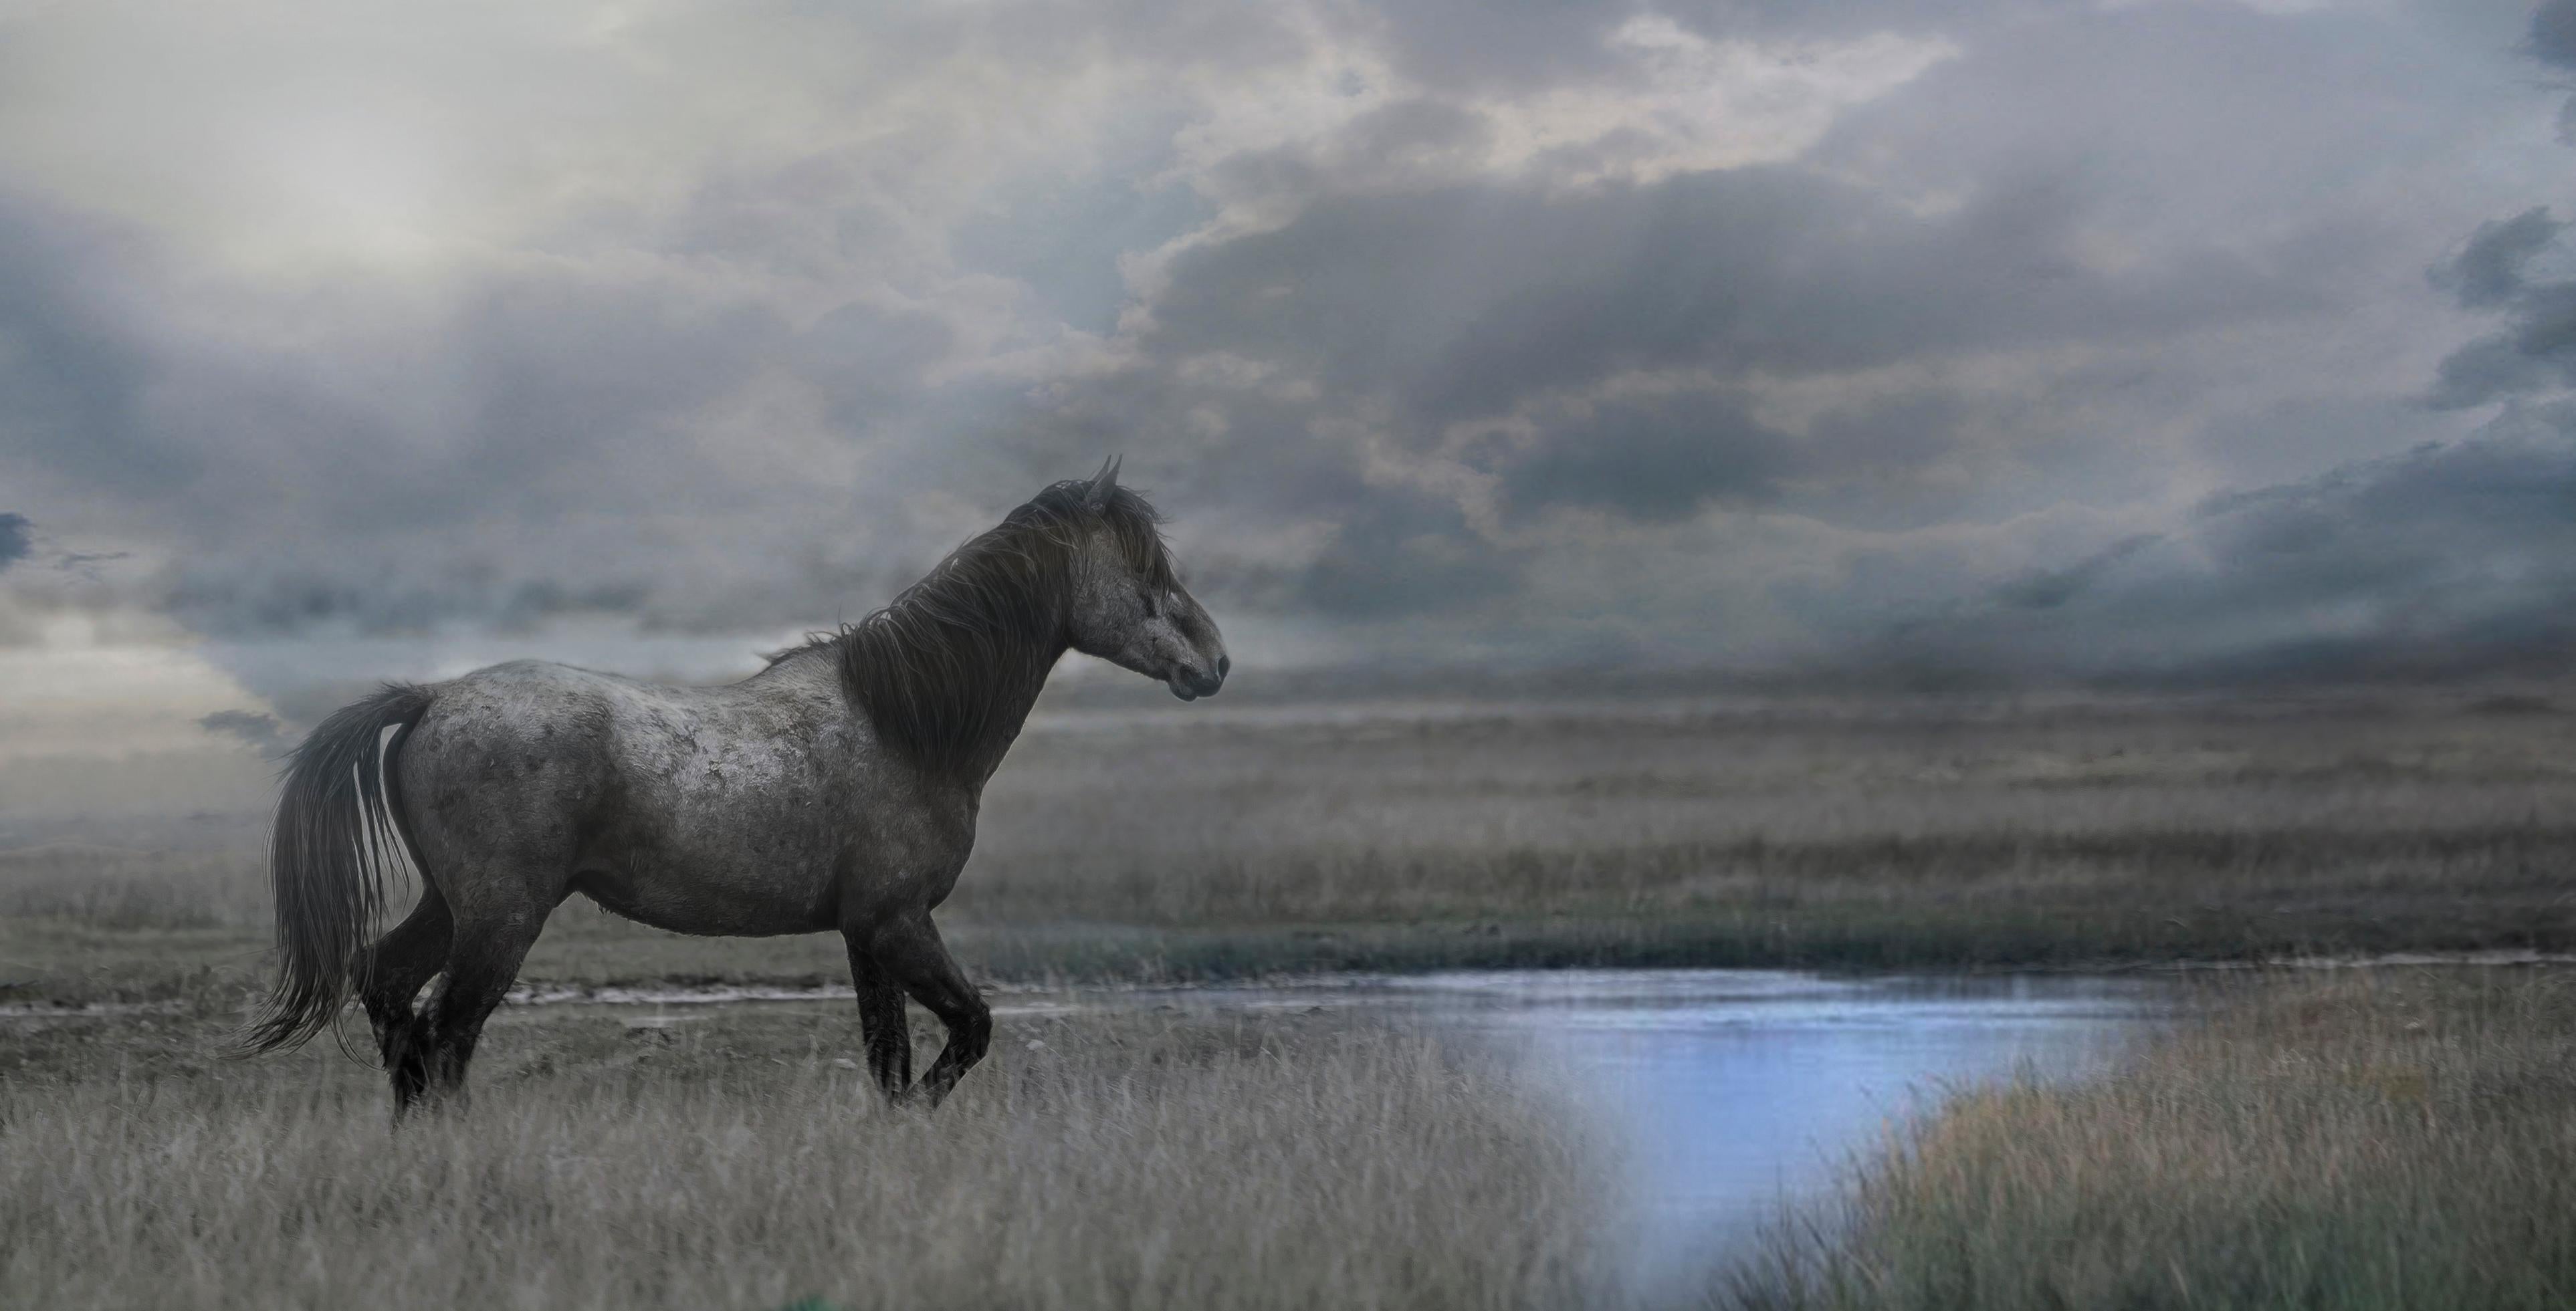 Shane Russeck Landscape Photograph - Once Upon a Time in the West - 30 x 60  Wild Horse Photography Fine Art